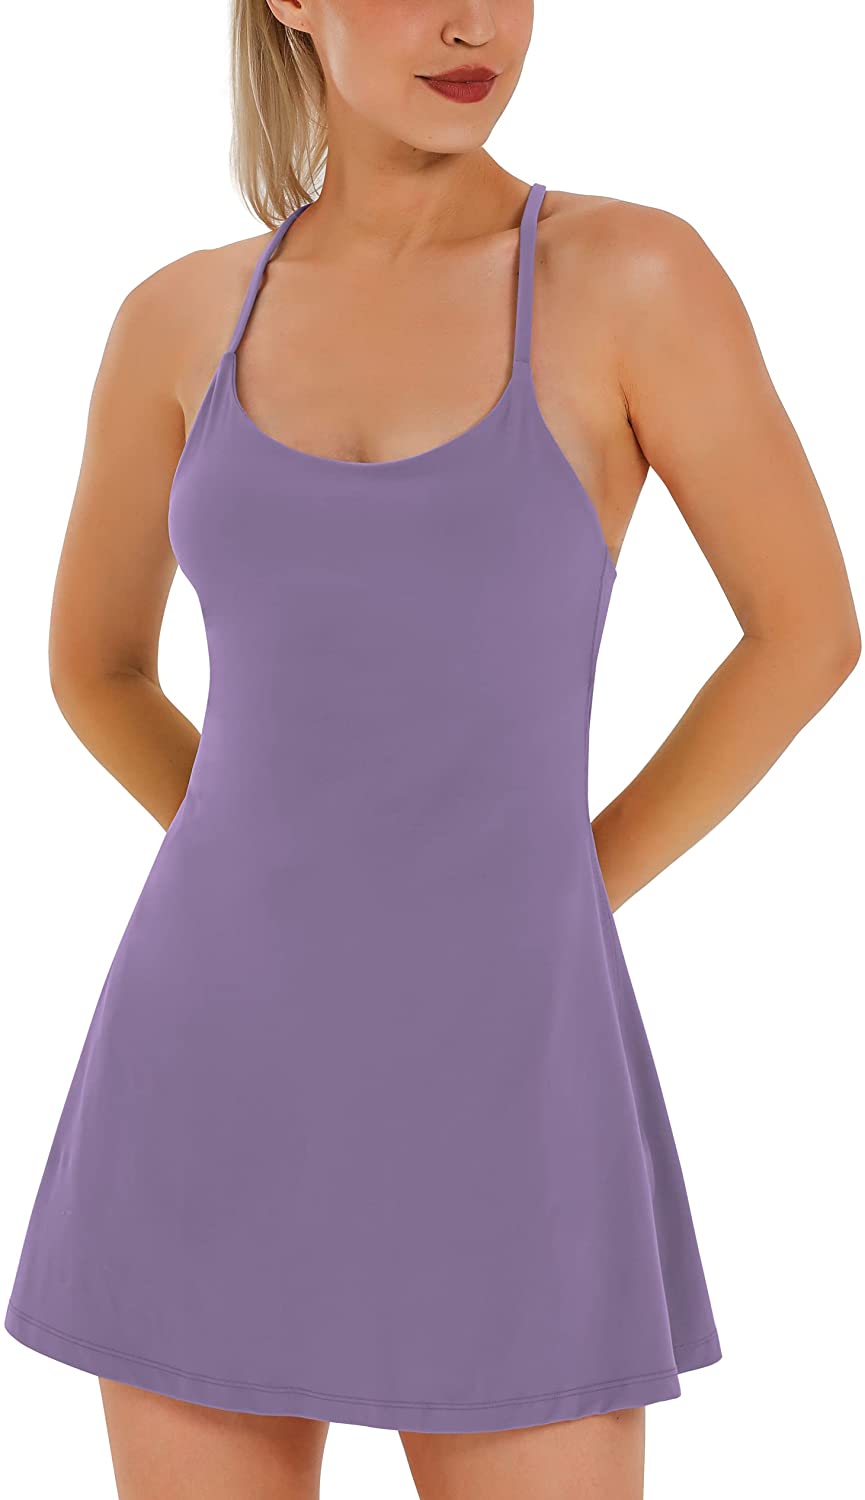 Womens Tennis Dress, Workout Dress with Built-in Bra & Shorts Pockets  Exercise D